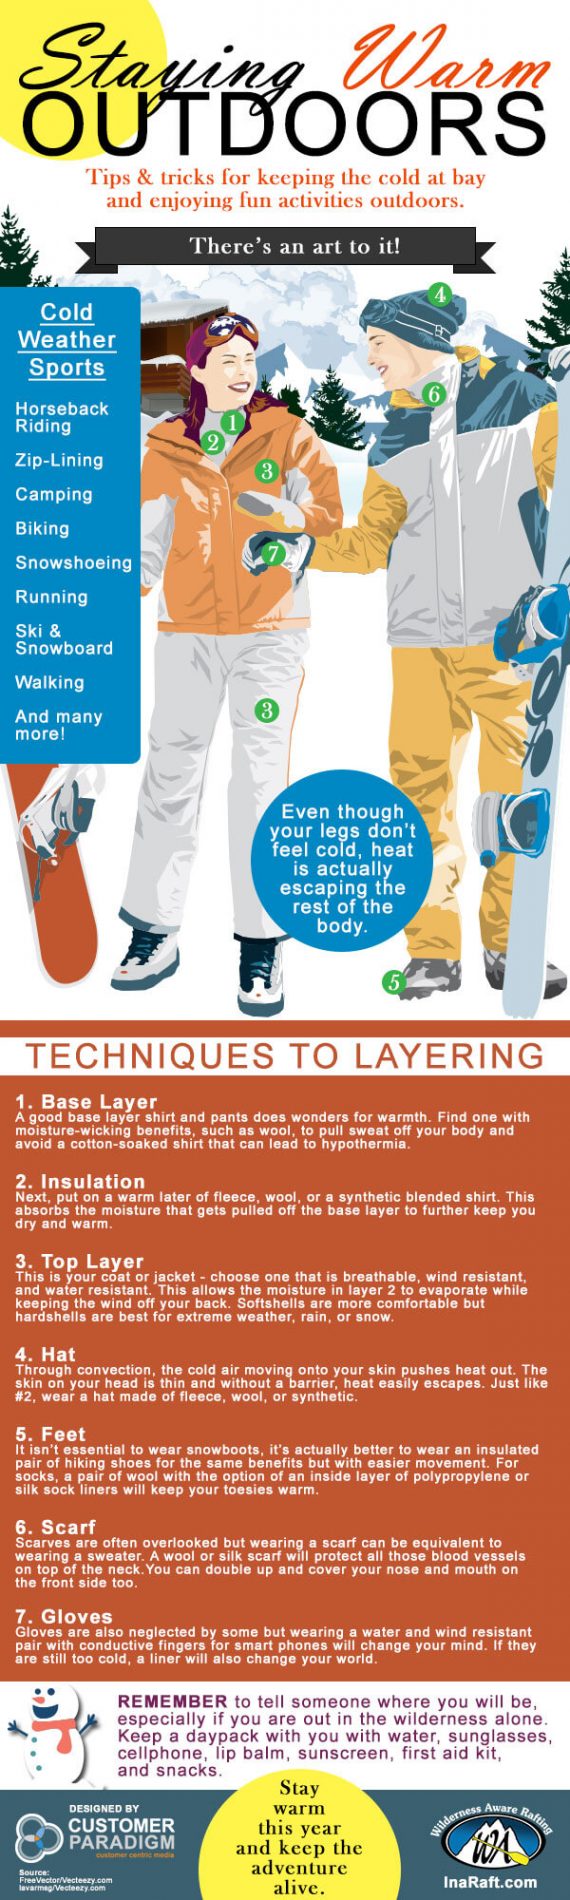 Staying Warm Outdoors Infographic - Wilderness Aware Rafting